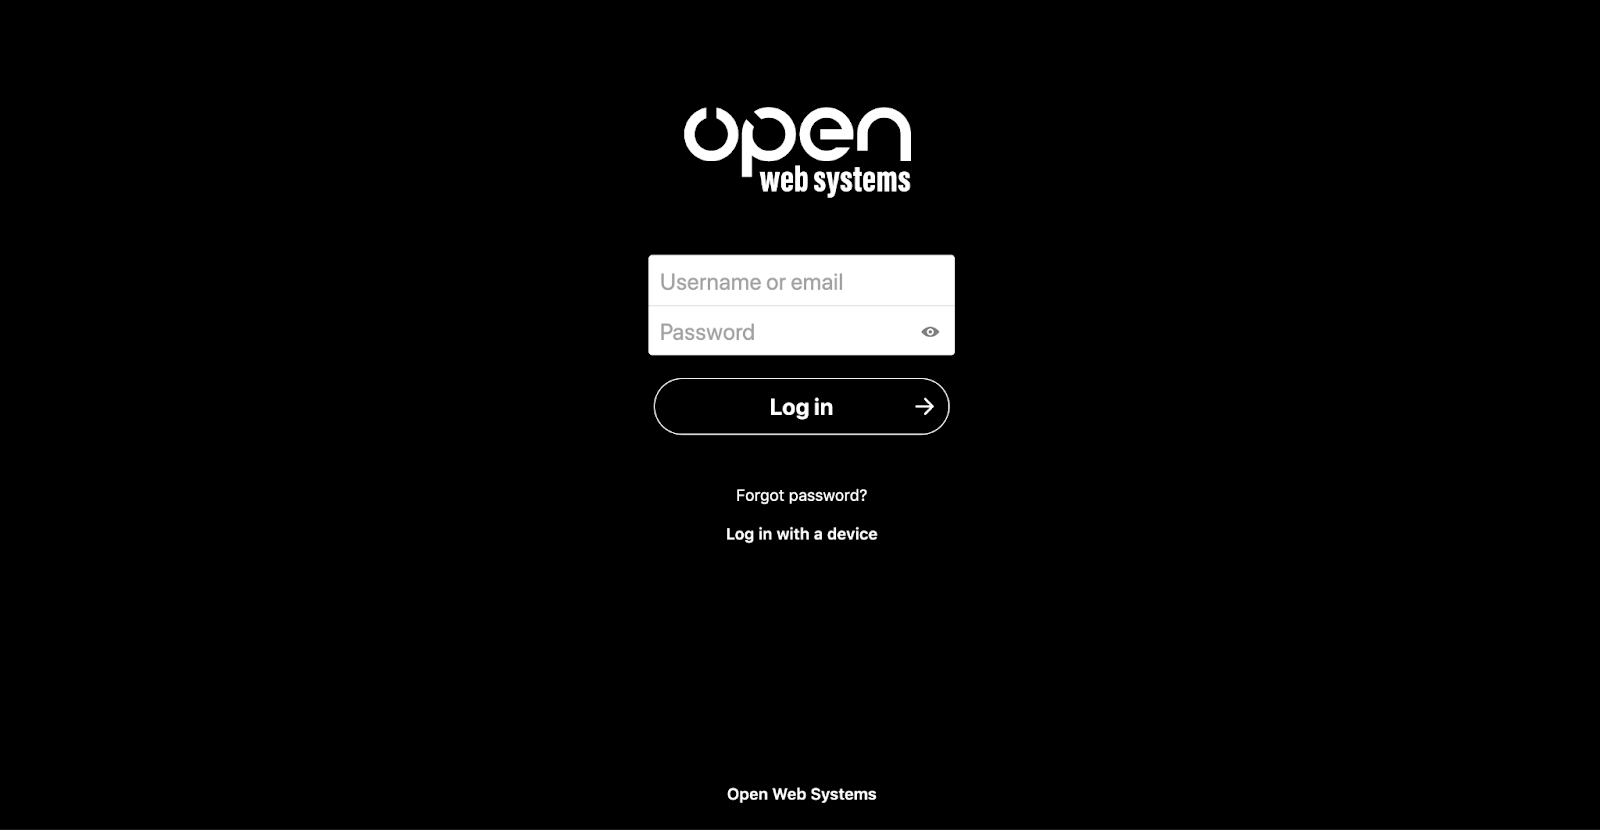 The Open Web Systems webmail login screen